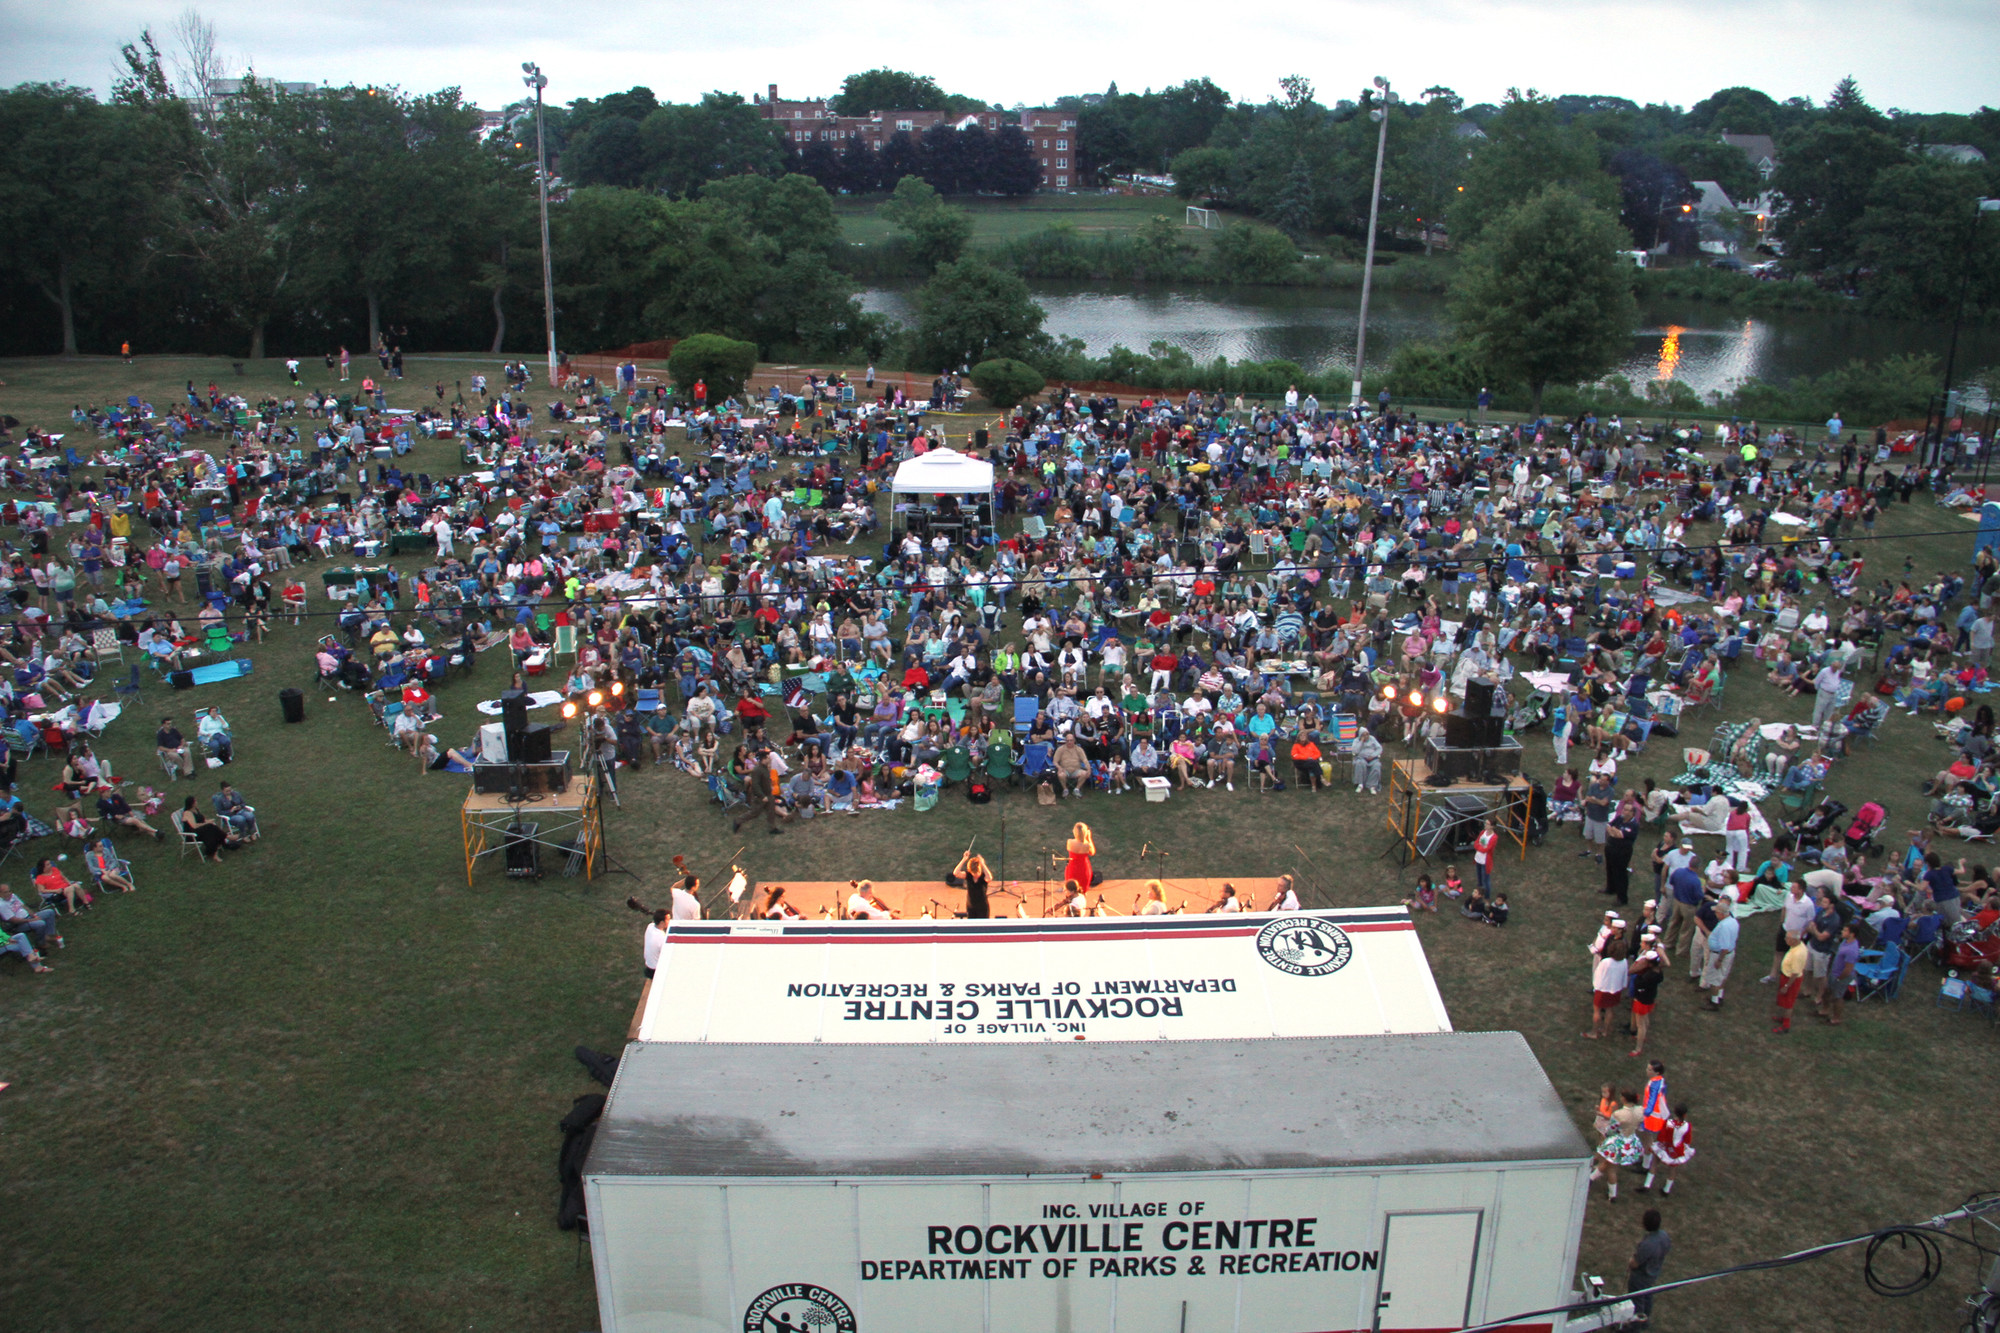 Thousands of people came to enjoy the show in Rockville Centre.